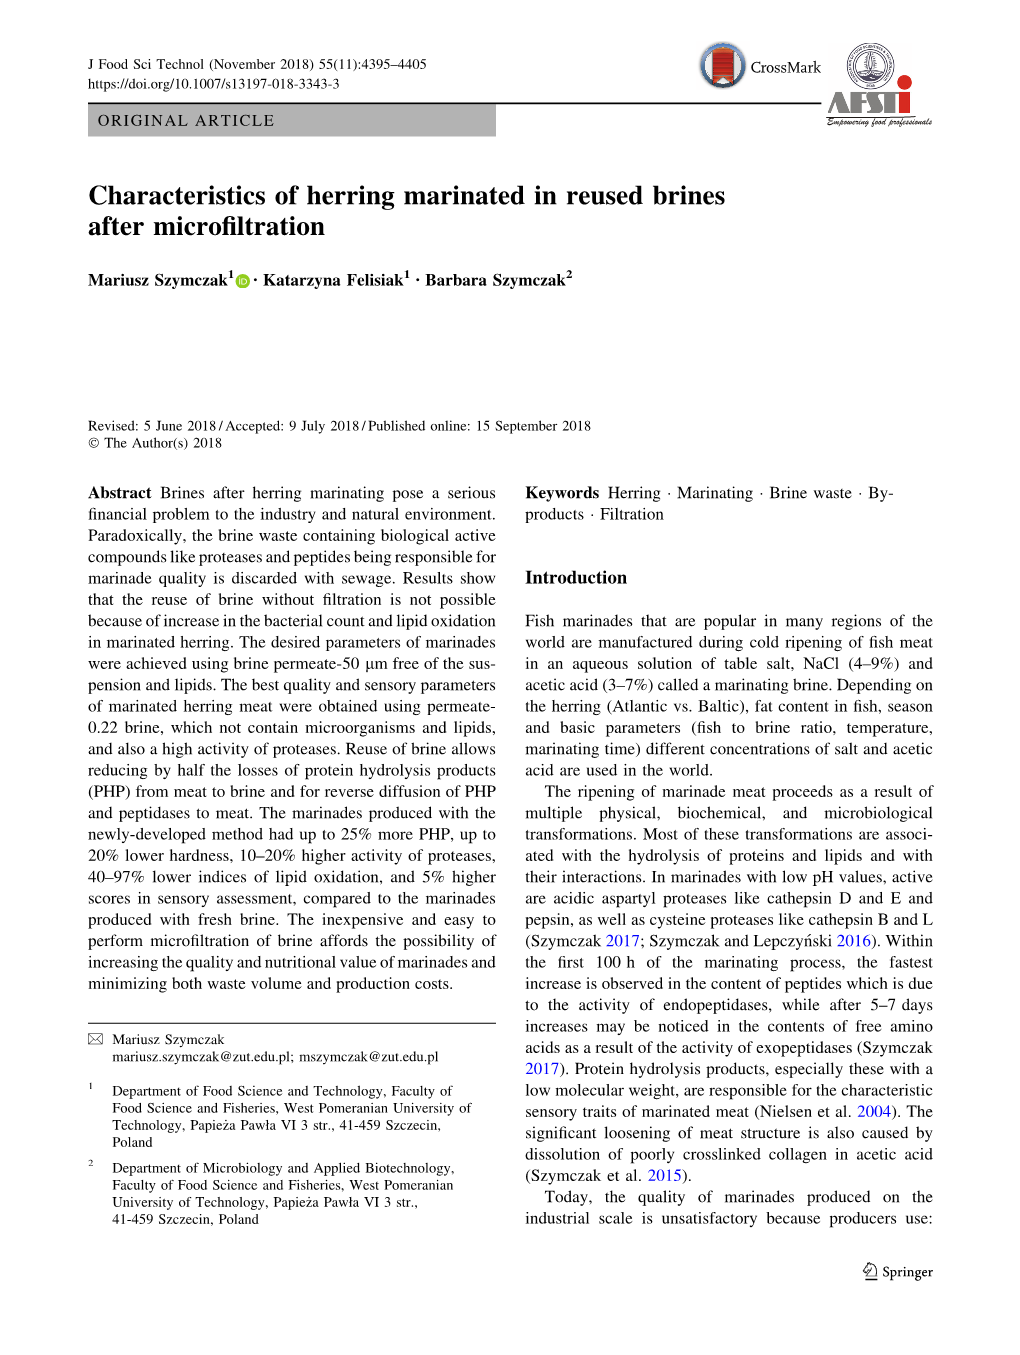 Characteristics of Herring Marinated in Reused Brines After Microfiltration